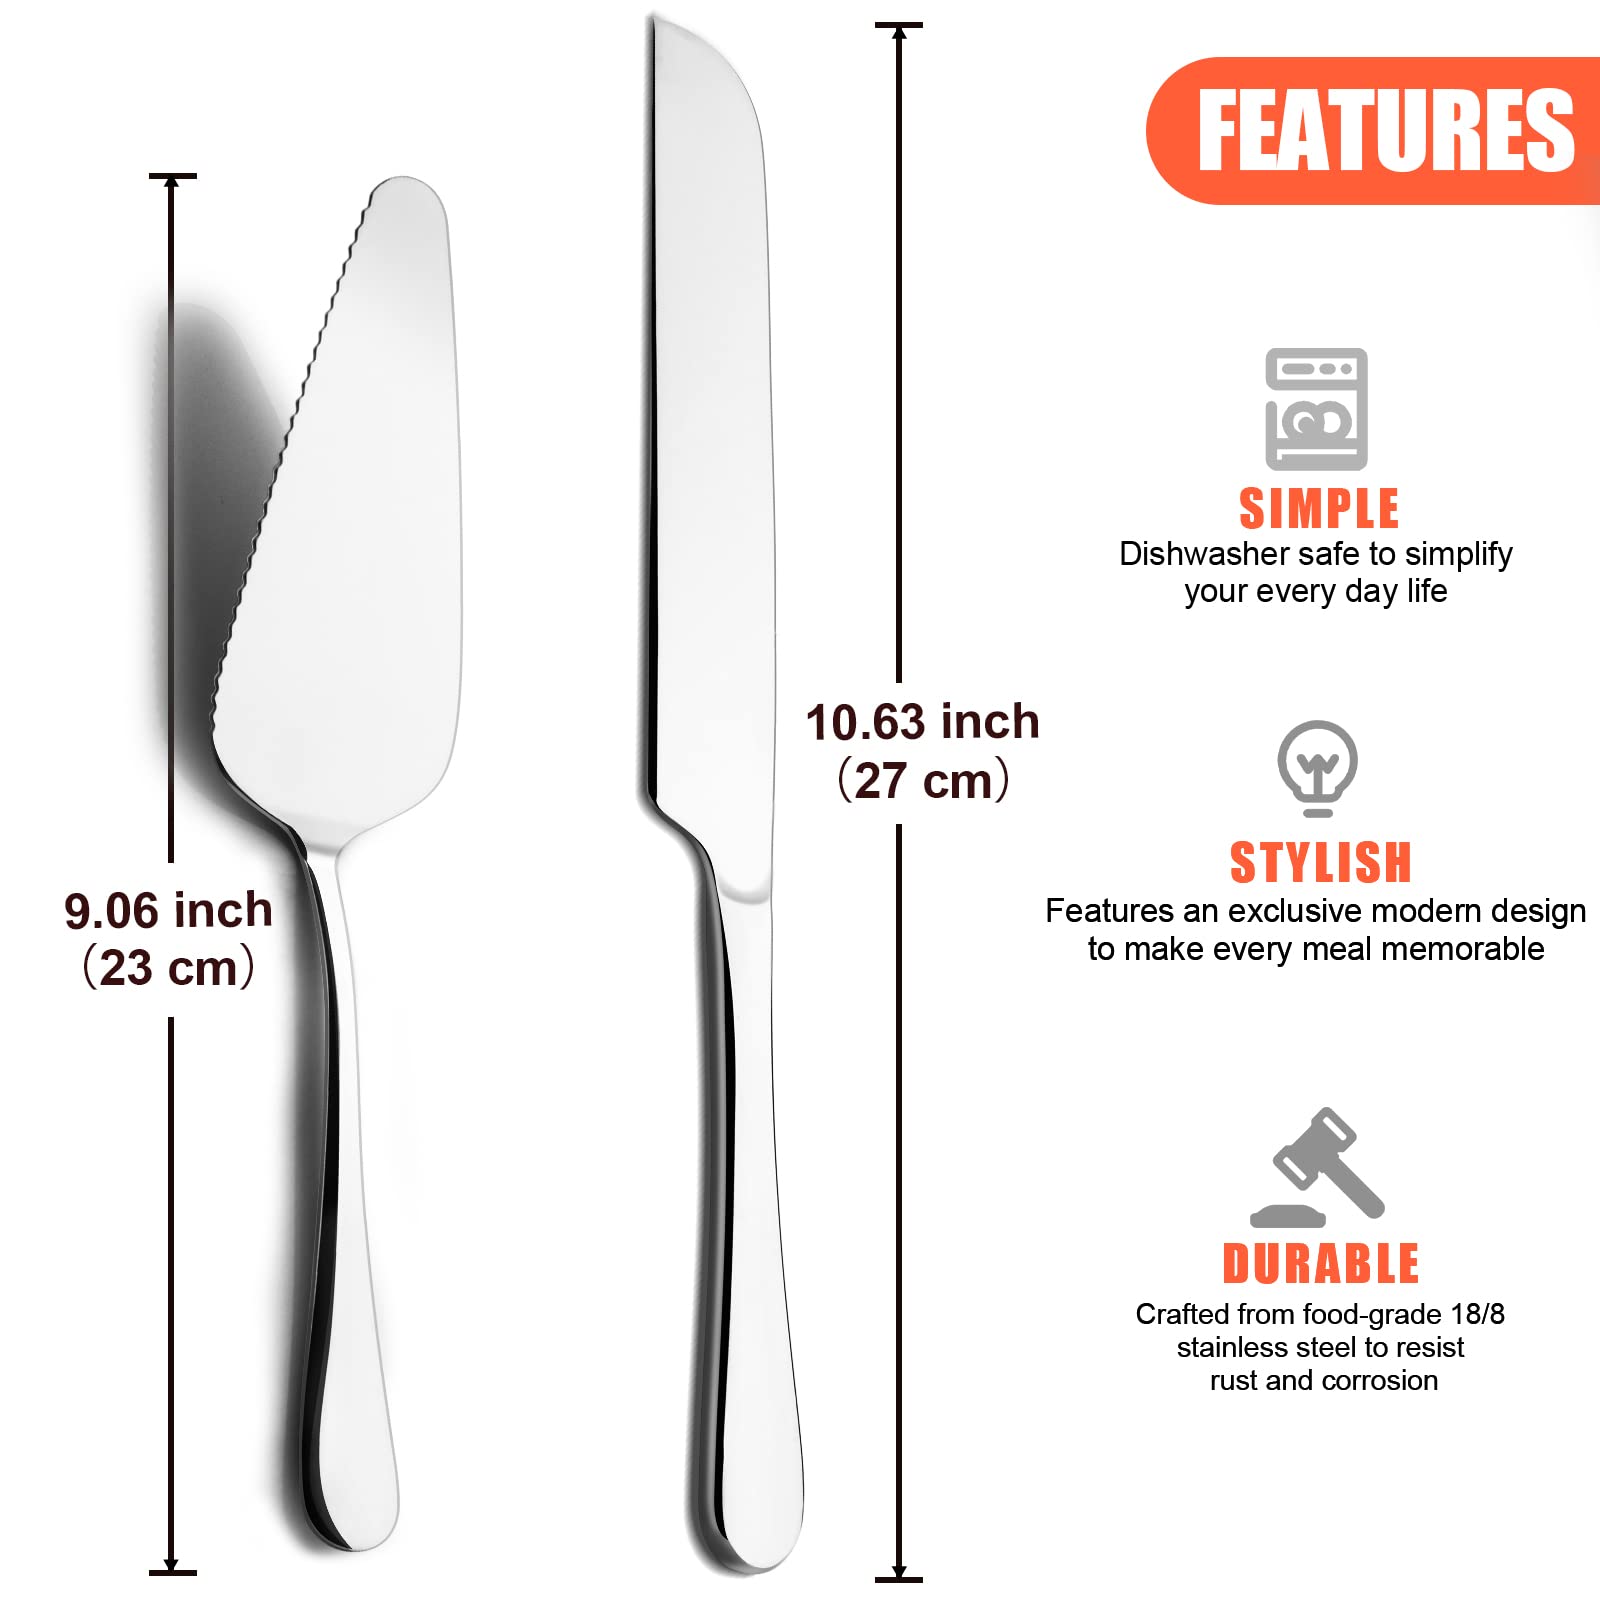 Mamajardin 2PC Premium Cake Knife and Server Set – Stainless Steel Cake Cutting Set for Wedding, Include Cake Cutter and Pie Spatula for Wedding, Birthday, Parties and anniversary, Dishwasher Safe